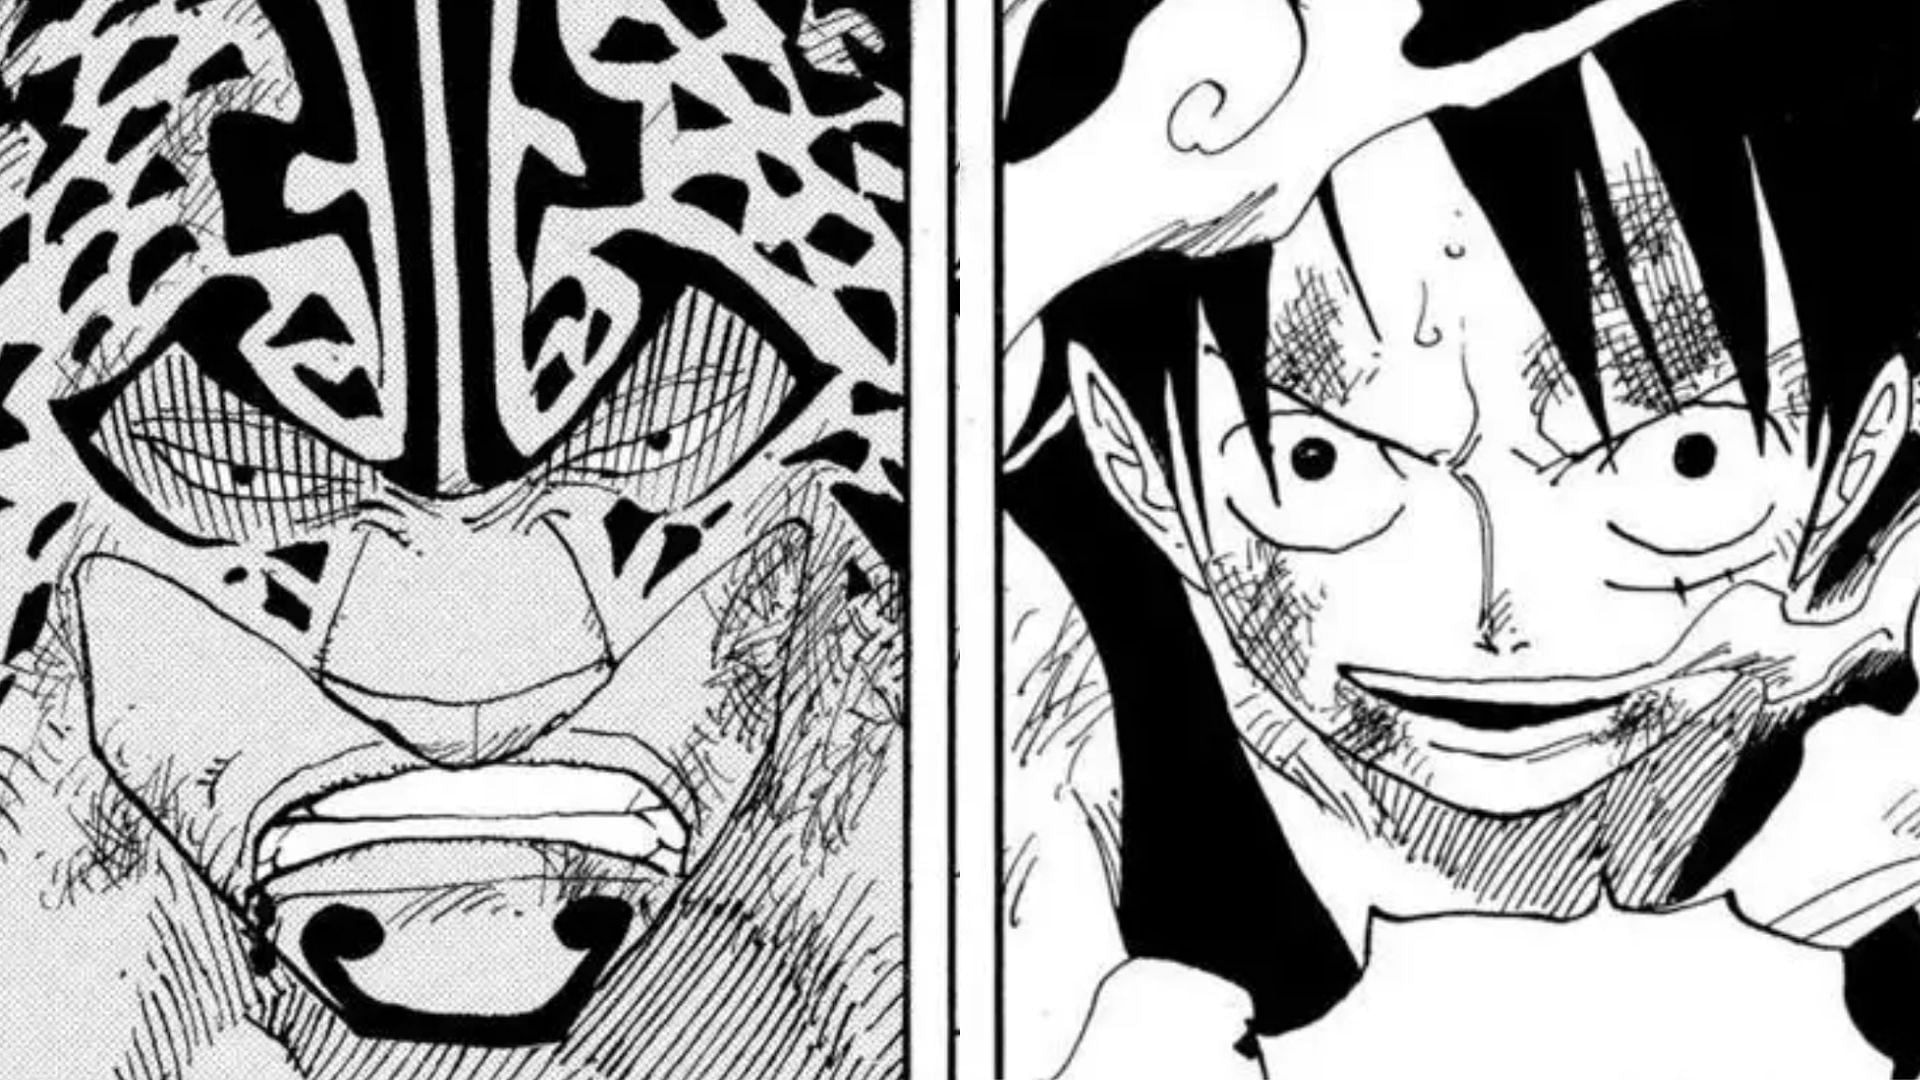 One Piece Chapter 1069 One Piece chapter 1069 spoilers: Why Luffy scared Lucci beyond imagination